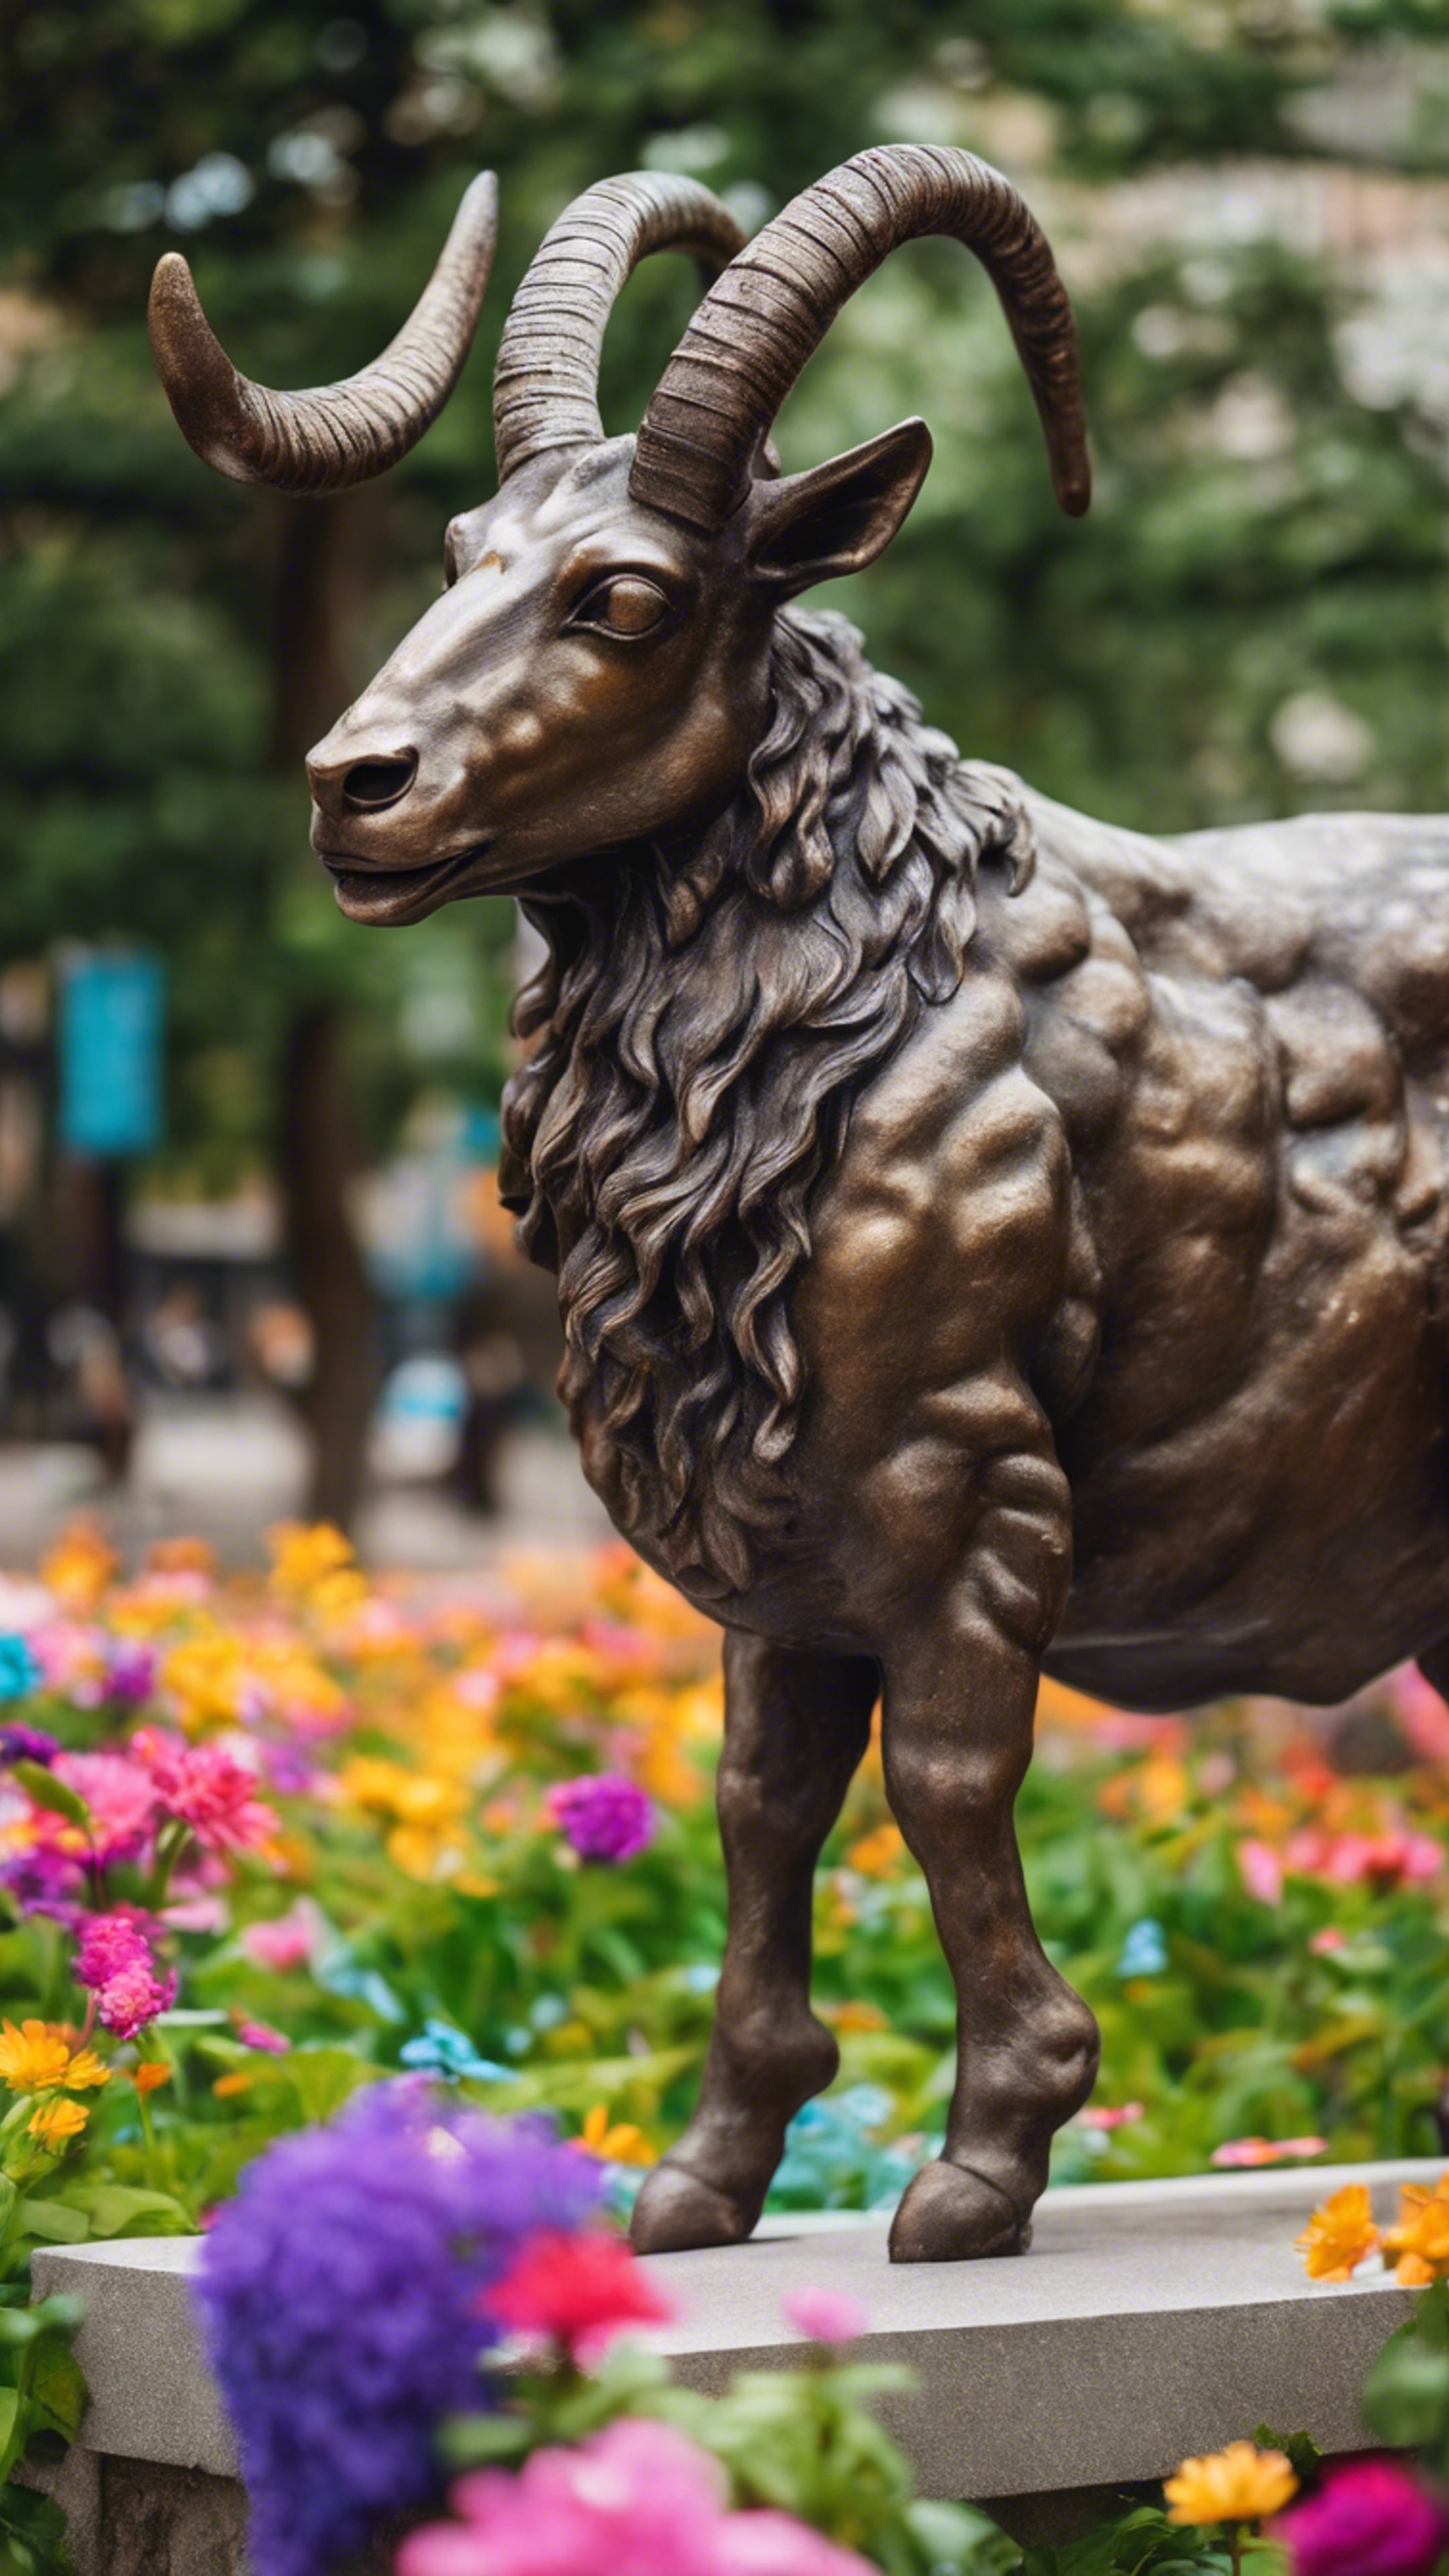 A detailed bronze statue of a Capricorn in a lively city park, surrounded by colorful flowers. Hintergrund[4693ead8121f483a9fe2]